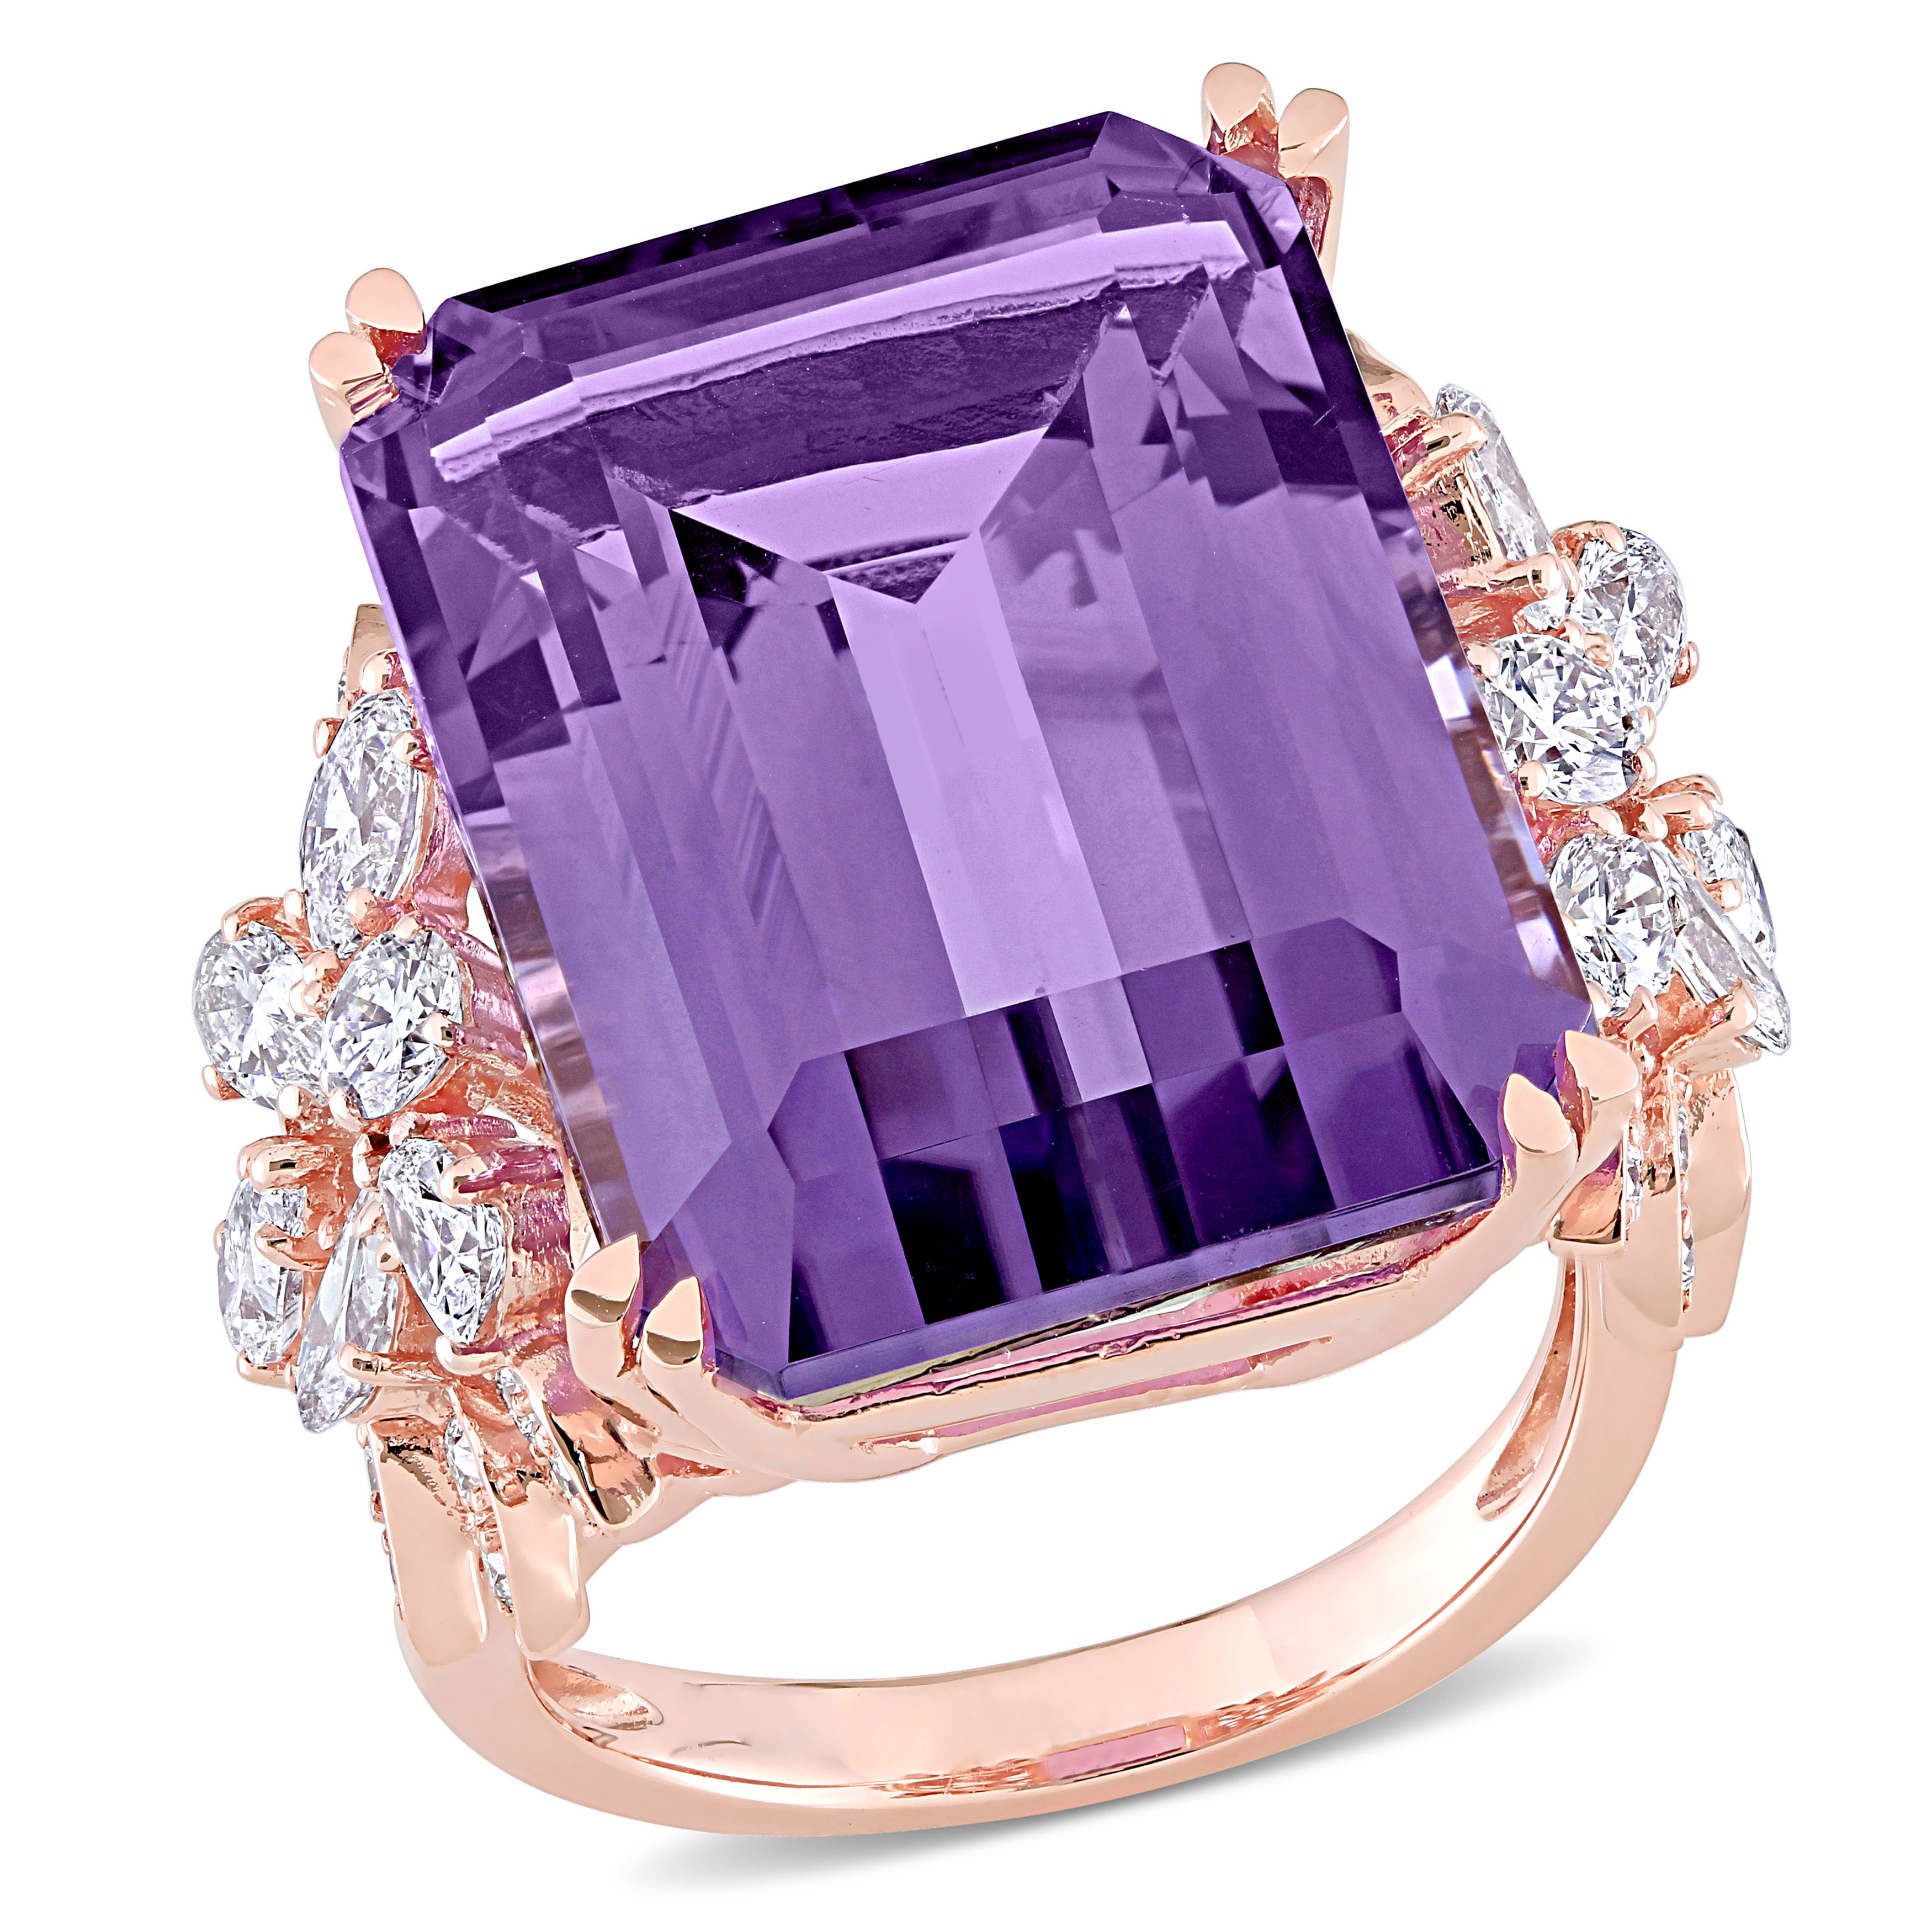 20 CT TGW Octagon Shaped Amethyst Ring with 1 3/4 CT TW Diamonds in 14k Rose Gold